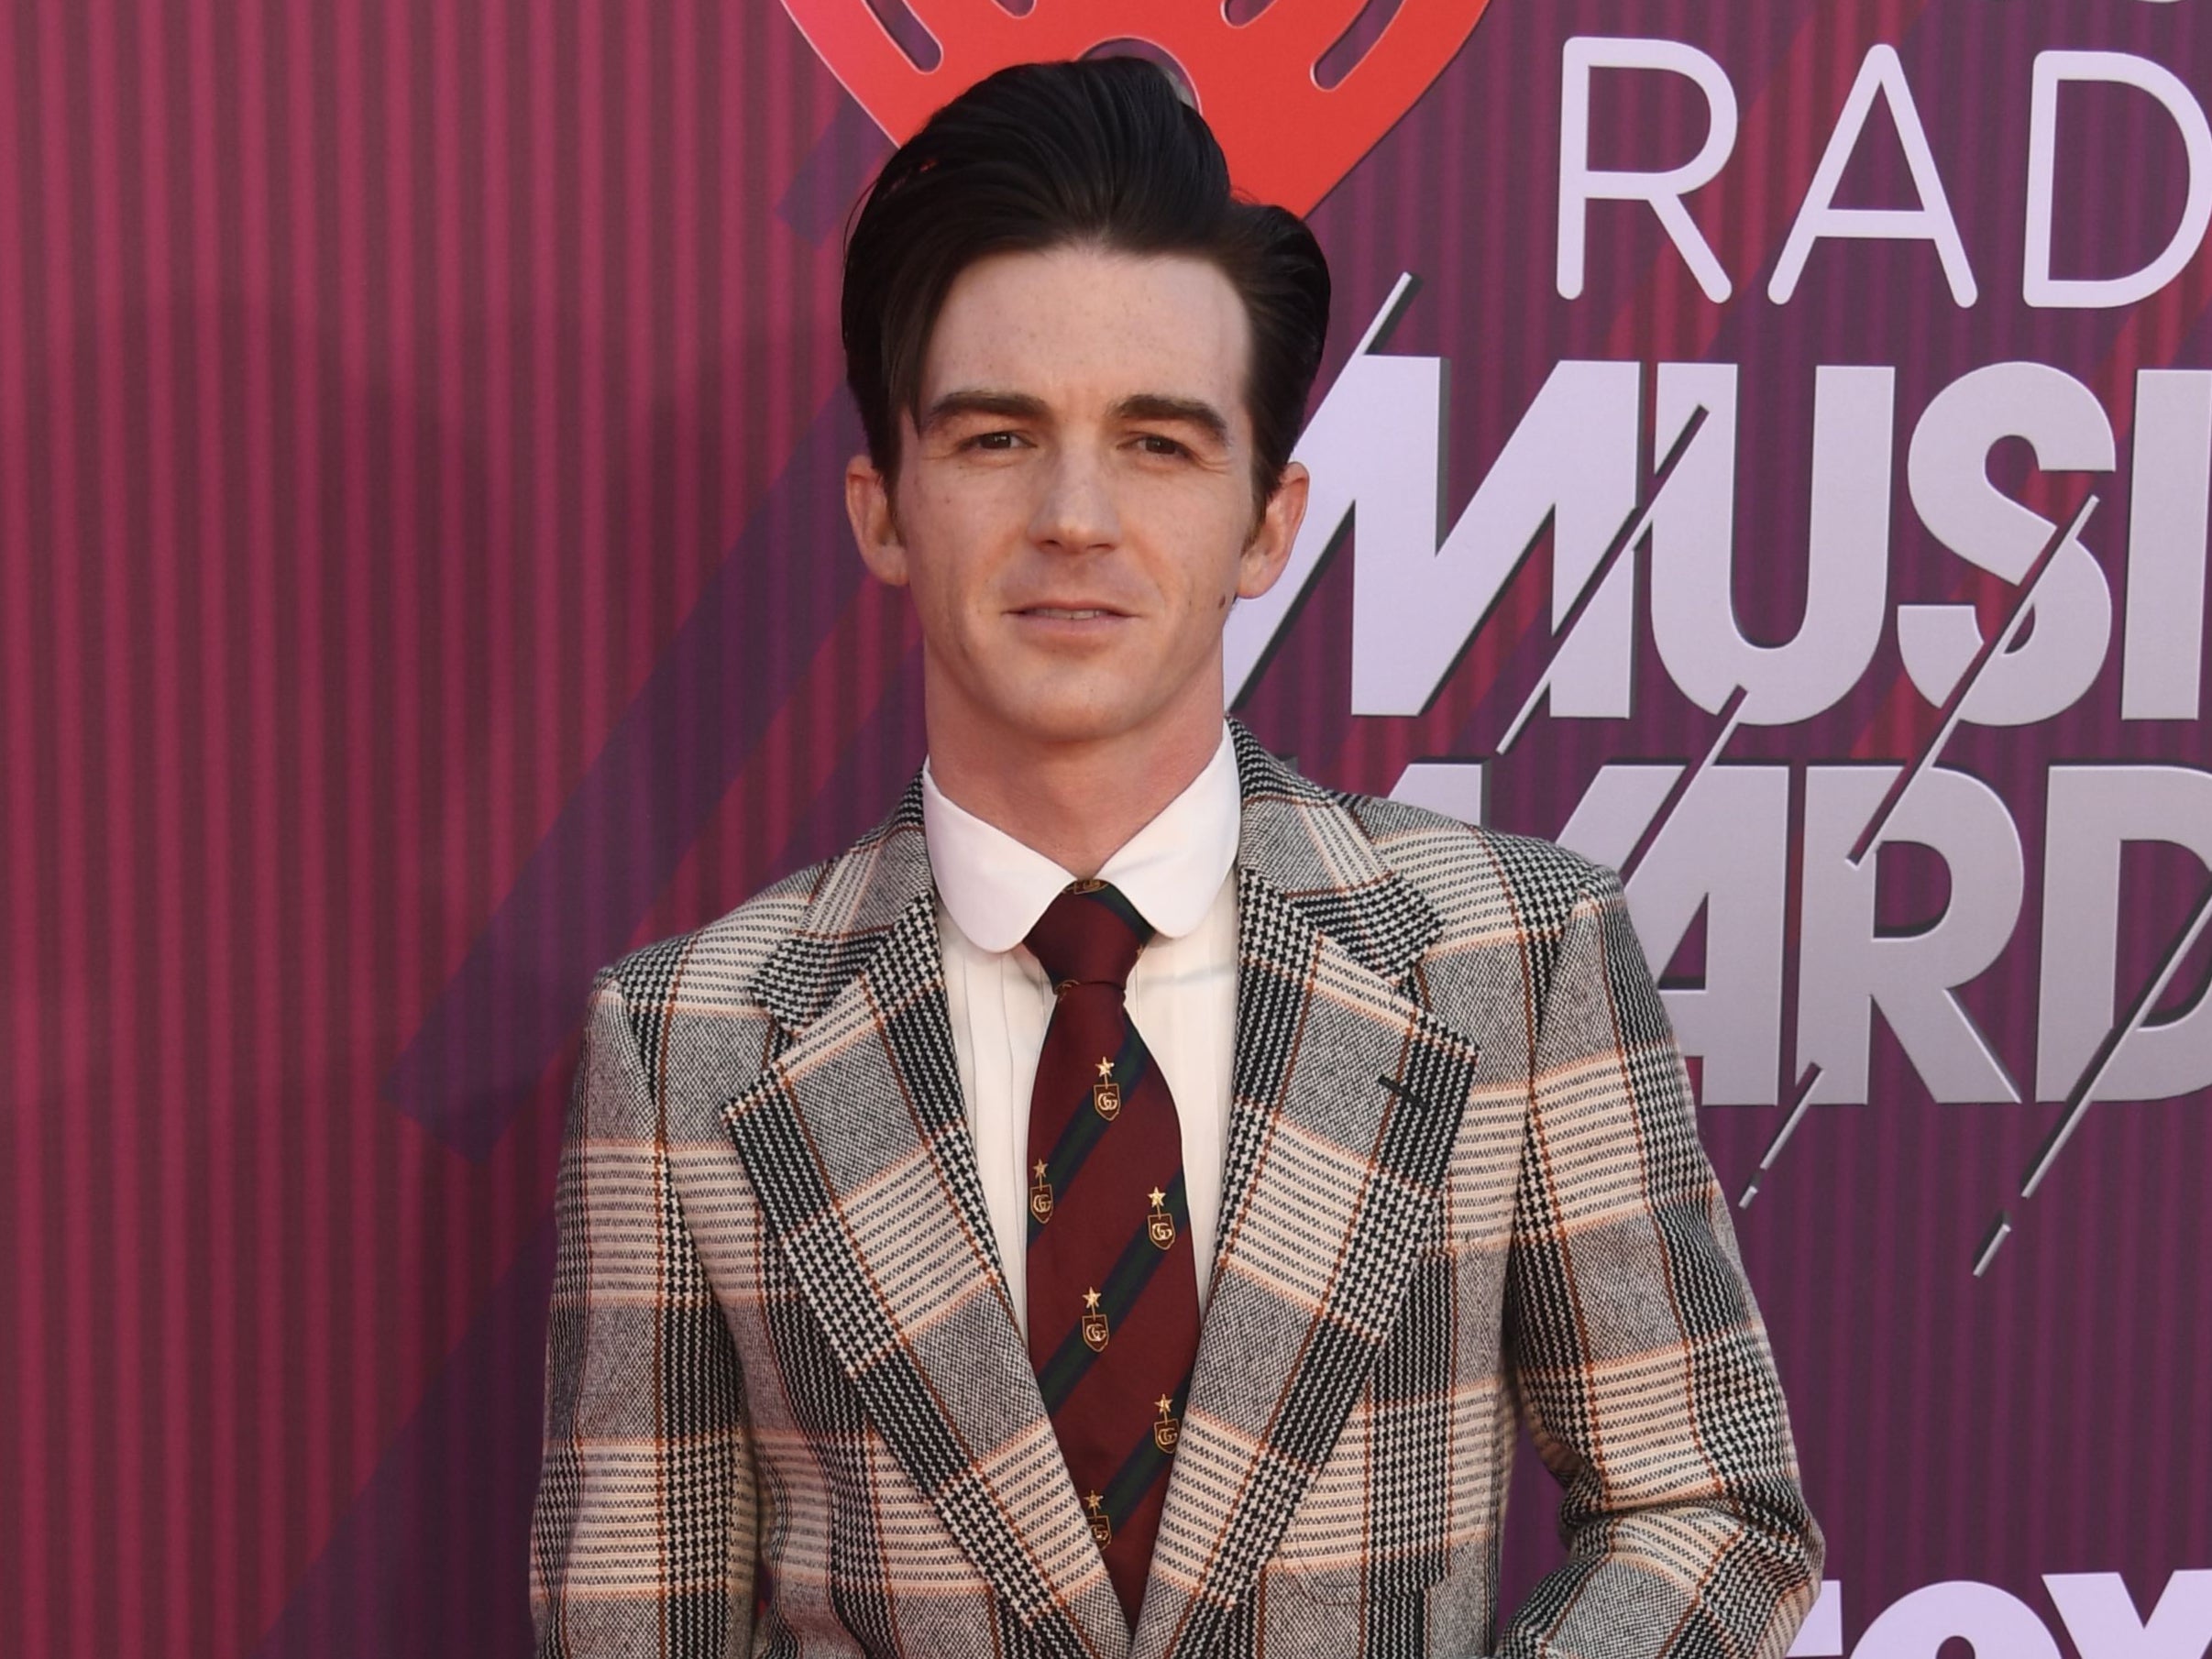 Drake Bell at the 2019 iHeartRadio Music Awards on 14 March 2019 in Los Angeles, California